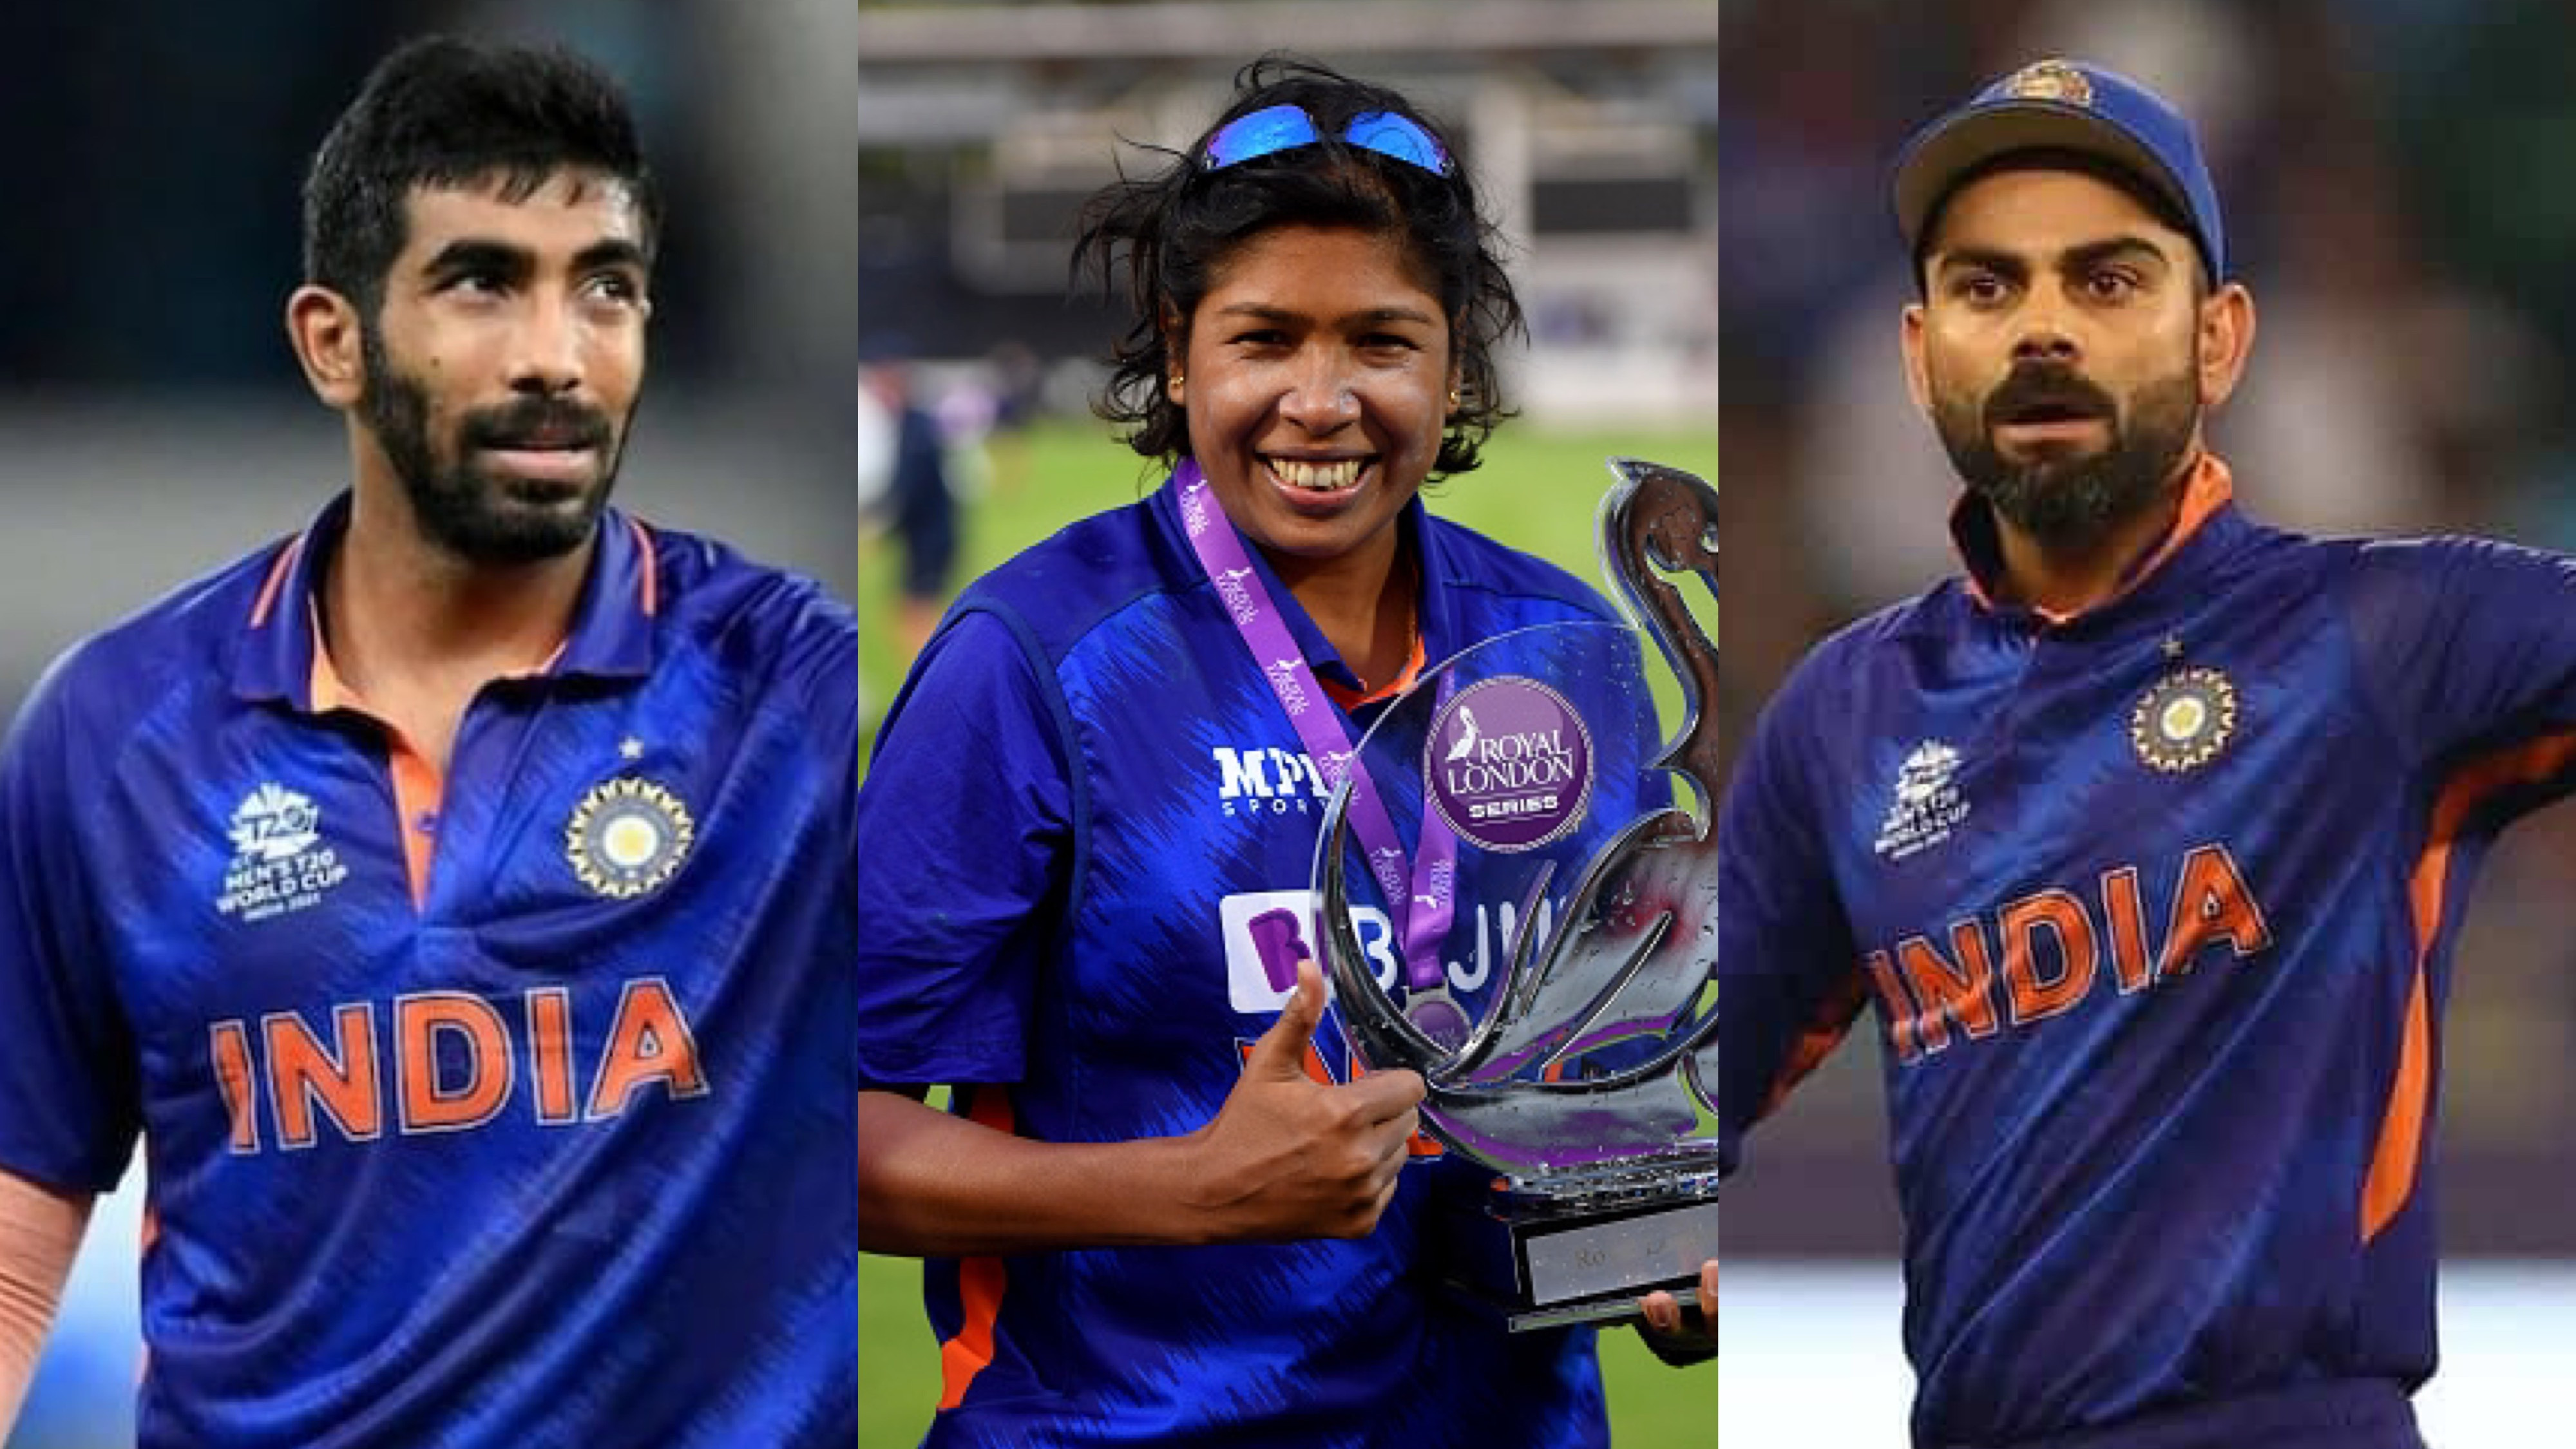 ENGW v INDW 2022: Team India pays tribute as Jhulan Goswami plays her last international match